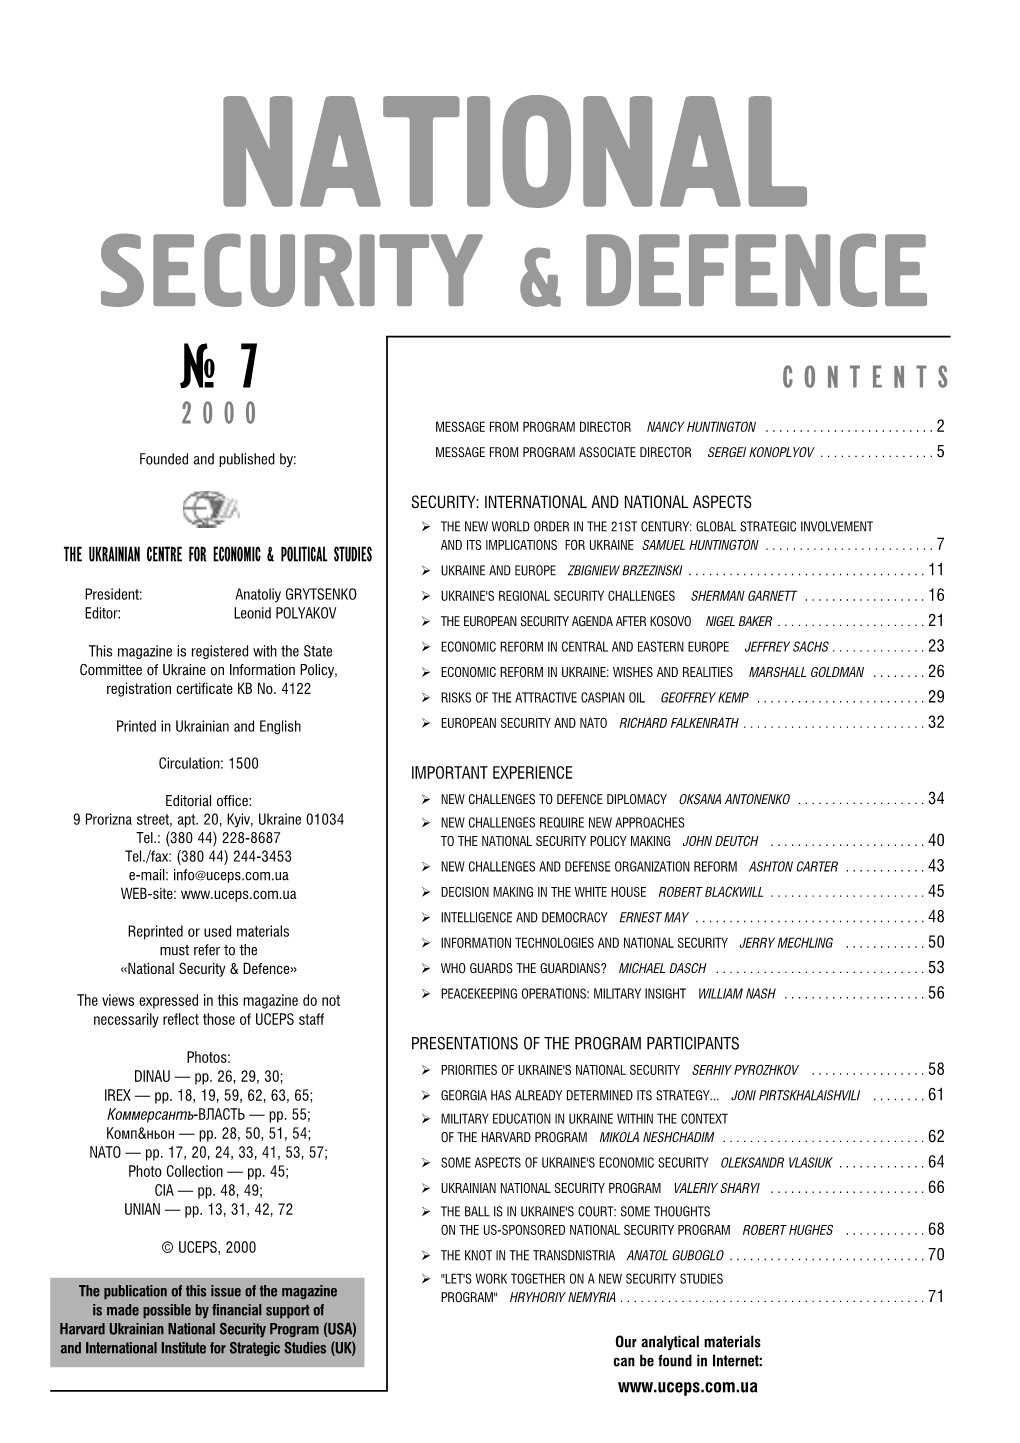 Security & Defence